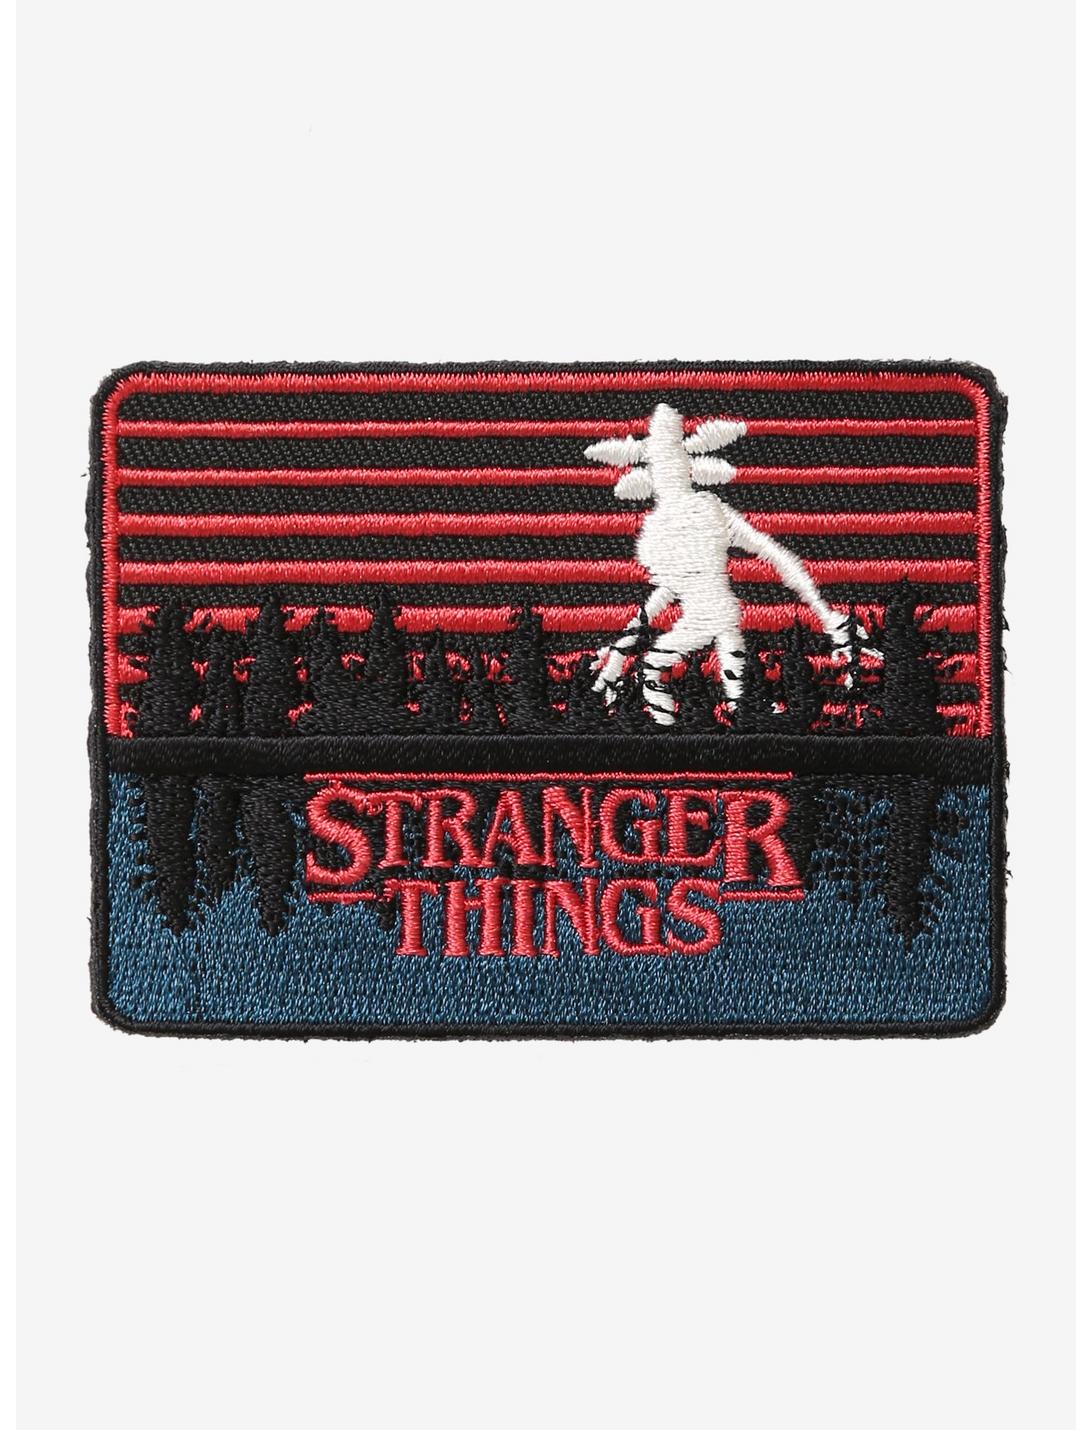 Stranger Things Demogorgon Forest Patch - BoxLunch Exclusive, , hi-res